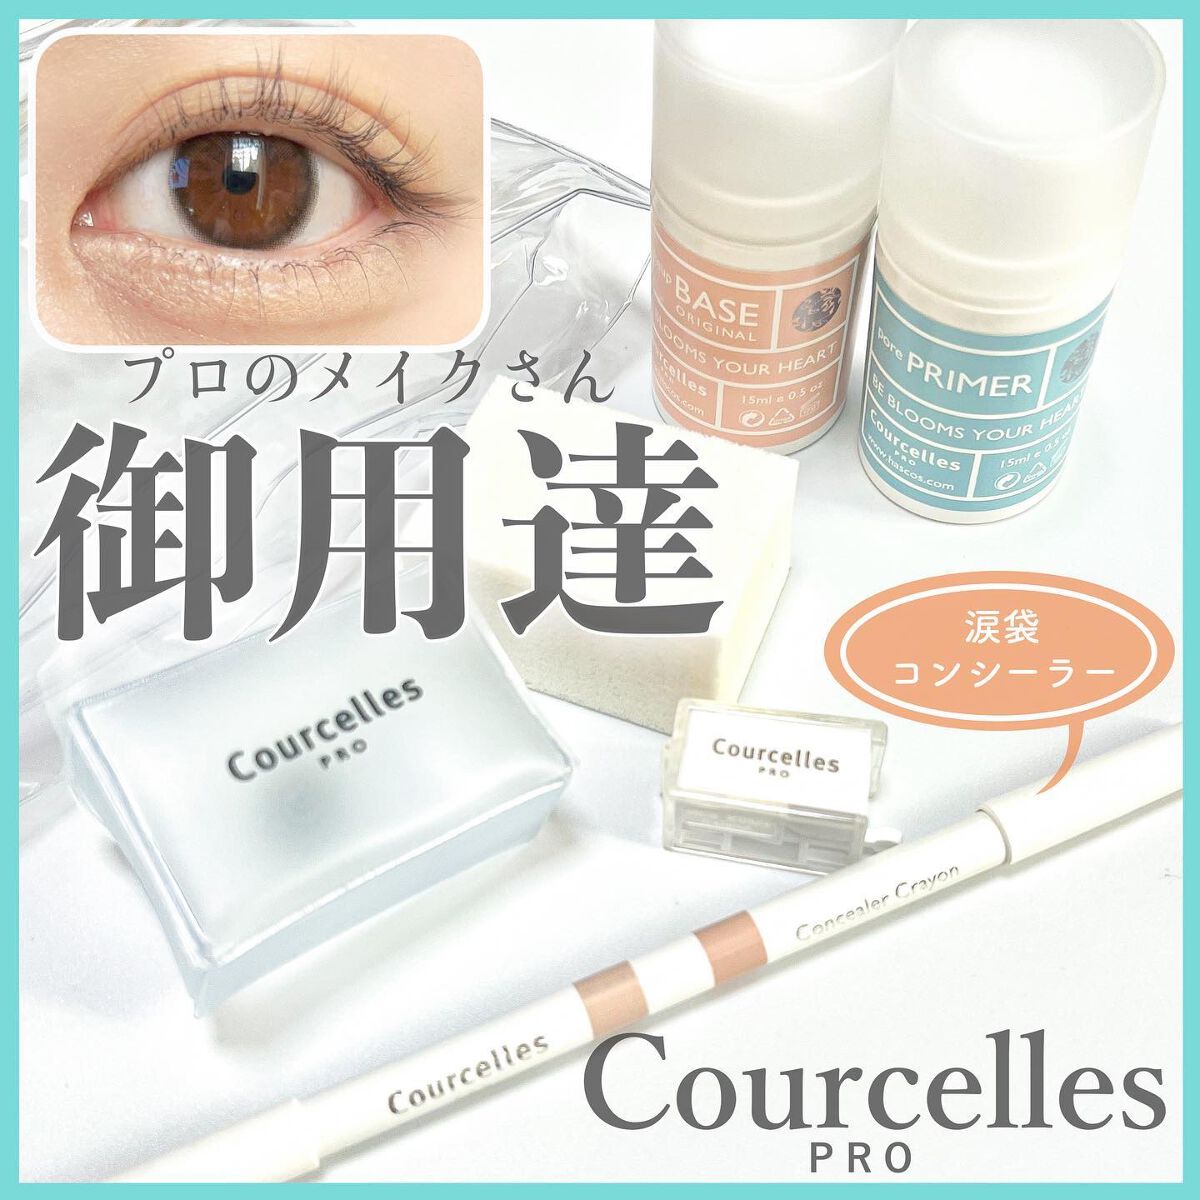 Courcelles クーセル　ベースメイクセット